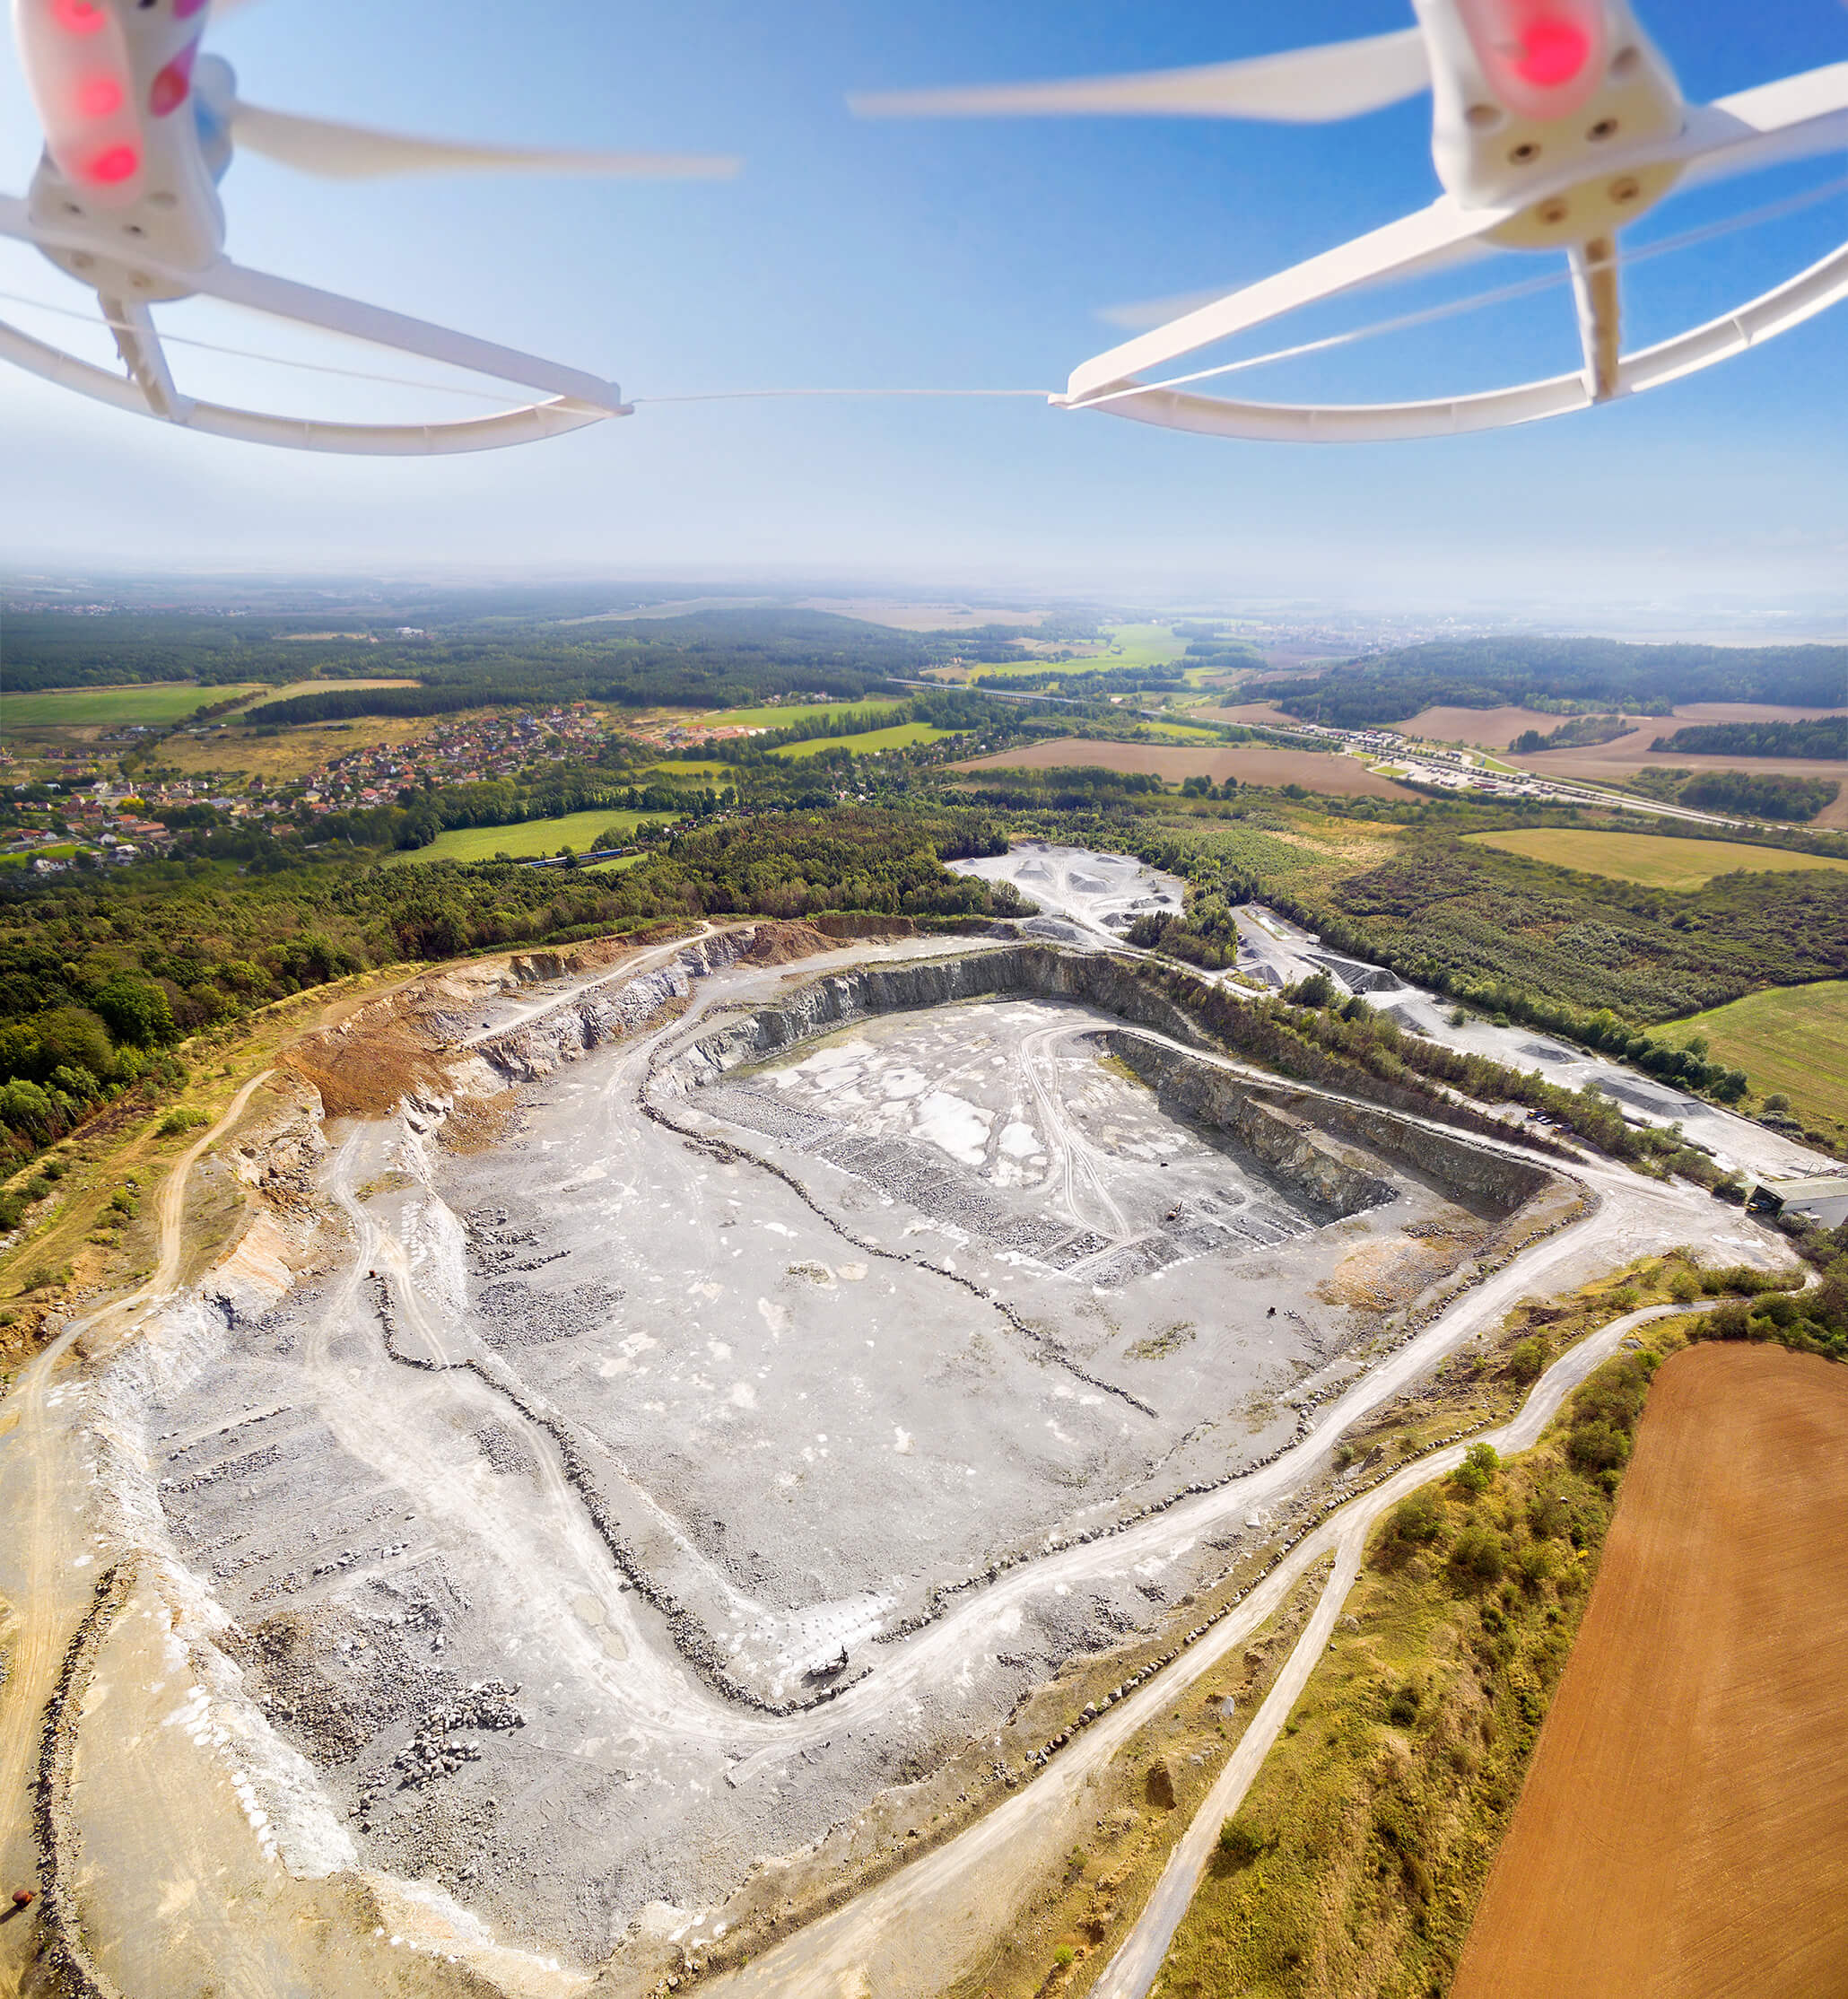 Aerial view of mining area with a drone